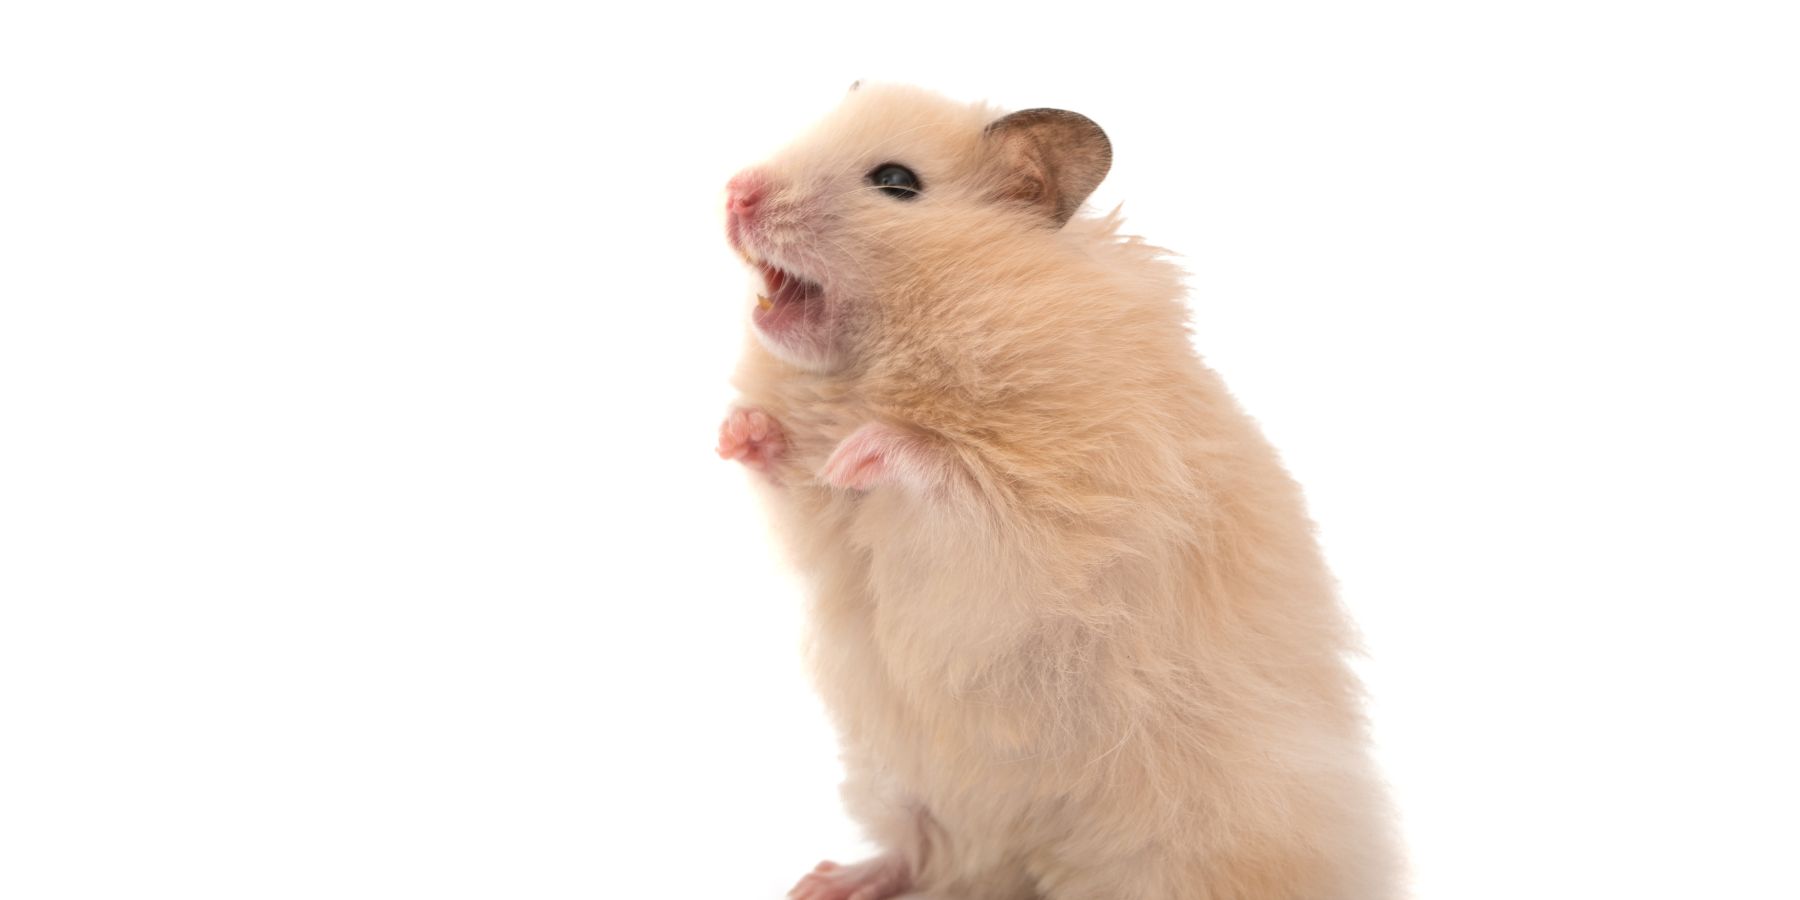 The Dos and Don’ts of Hamster Feeding